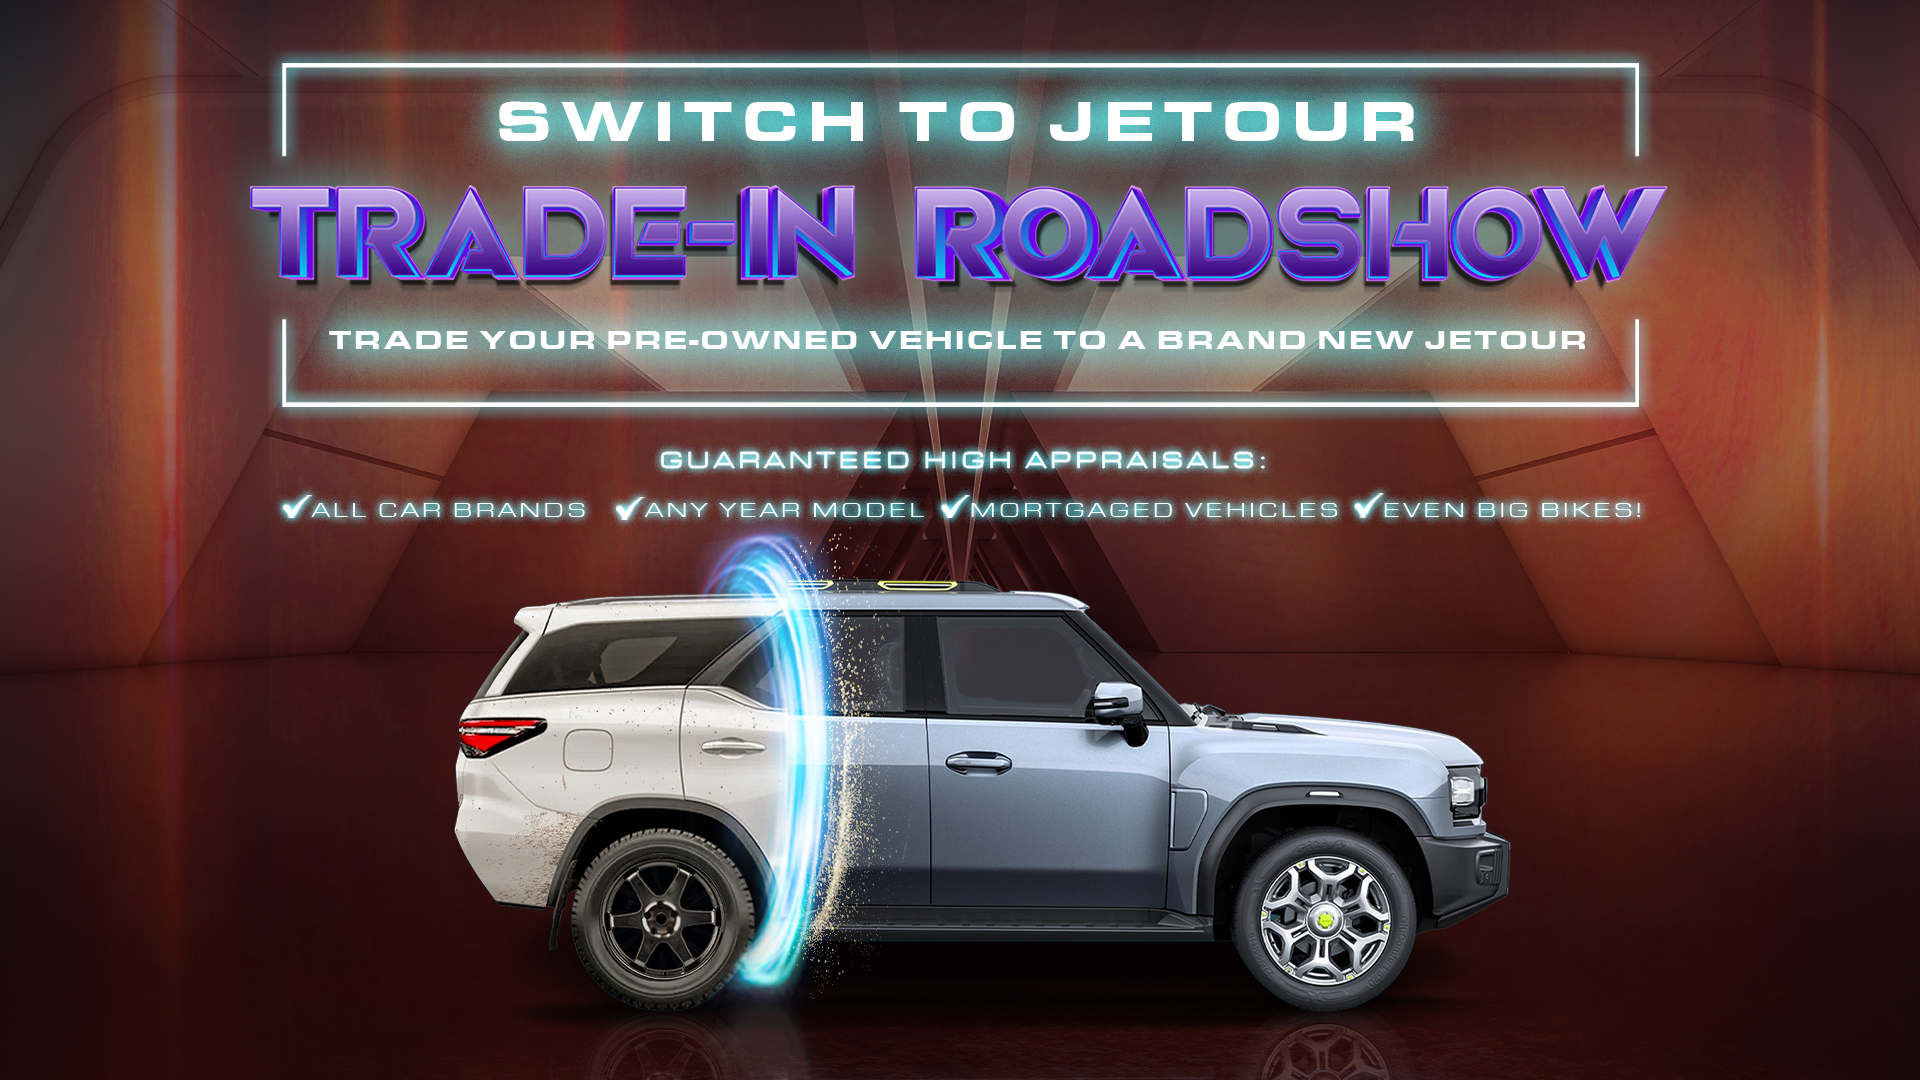 Out with the old, in with the new: JETOUR AutoPhilippines’ Trade-In Roadshow returns with more enticing financing offers